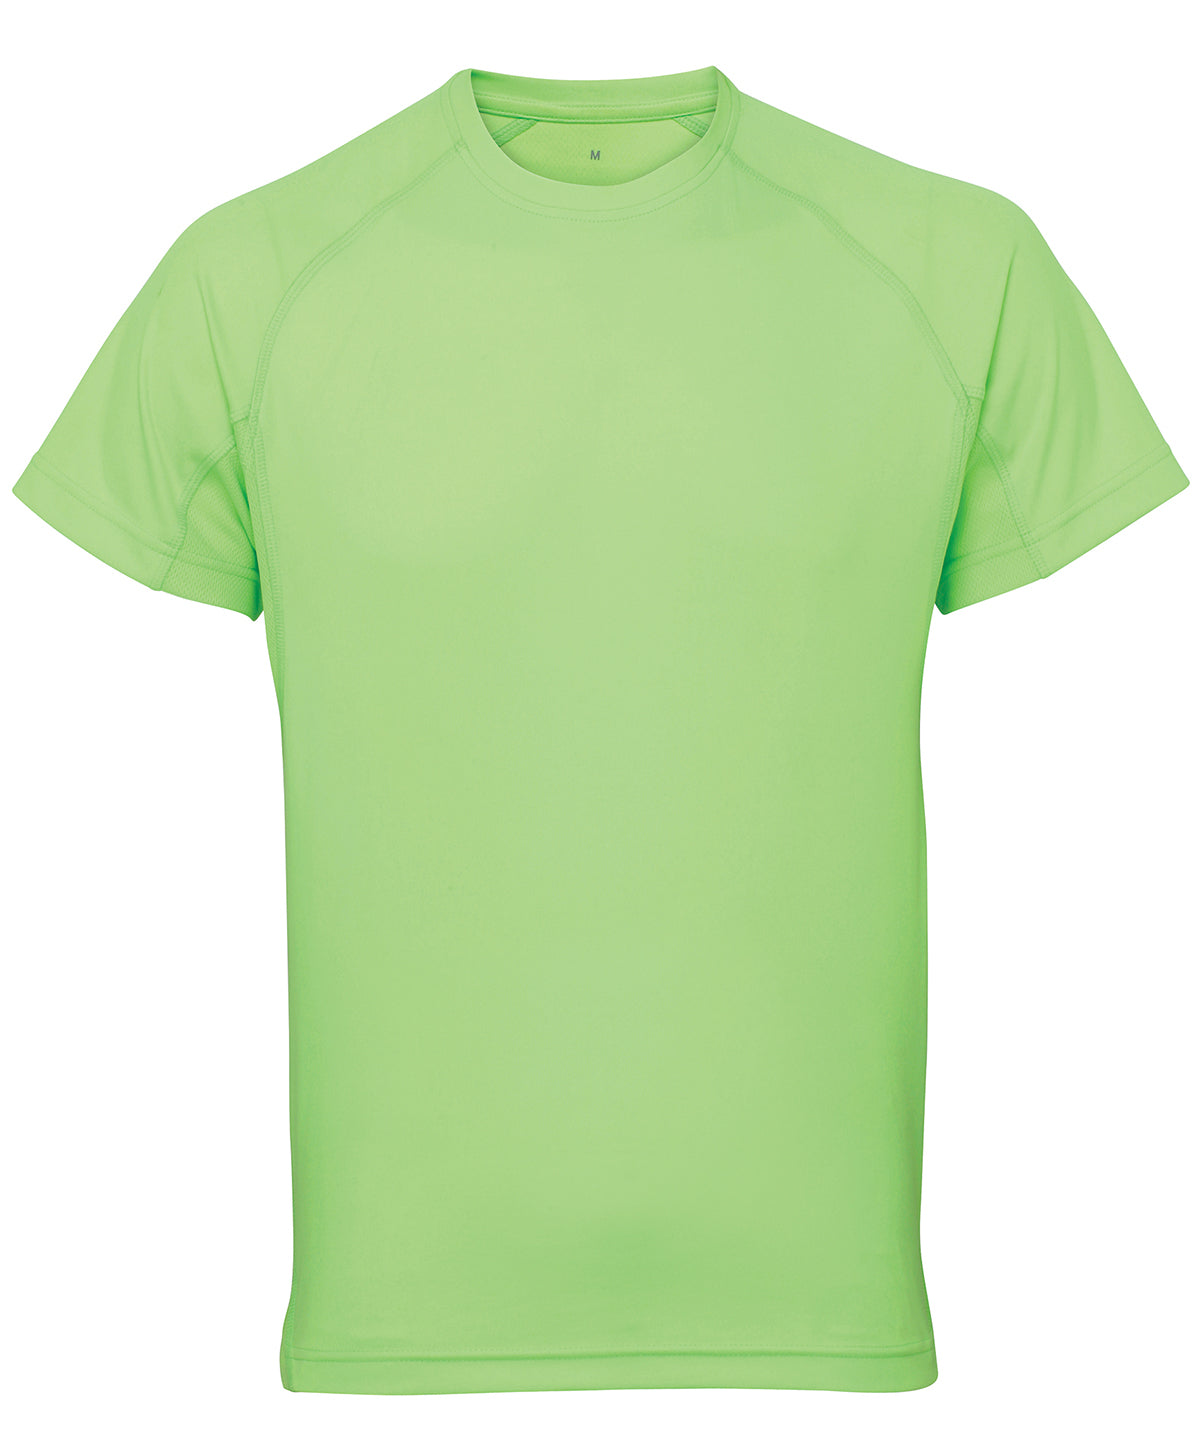 Lightning Green - TriDri® panelled tech tee T-Shirts TriDri® Activewear & Performance, Athleisurewear, Back to the Gym, Exclusives, Gymwear, Must Haves, Plus Sizes, Rebrandable, S/S 19 Trend Colours, Sports & Leisure, T-Shirts & Vests, UPF Protection Schoolwear Centres